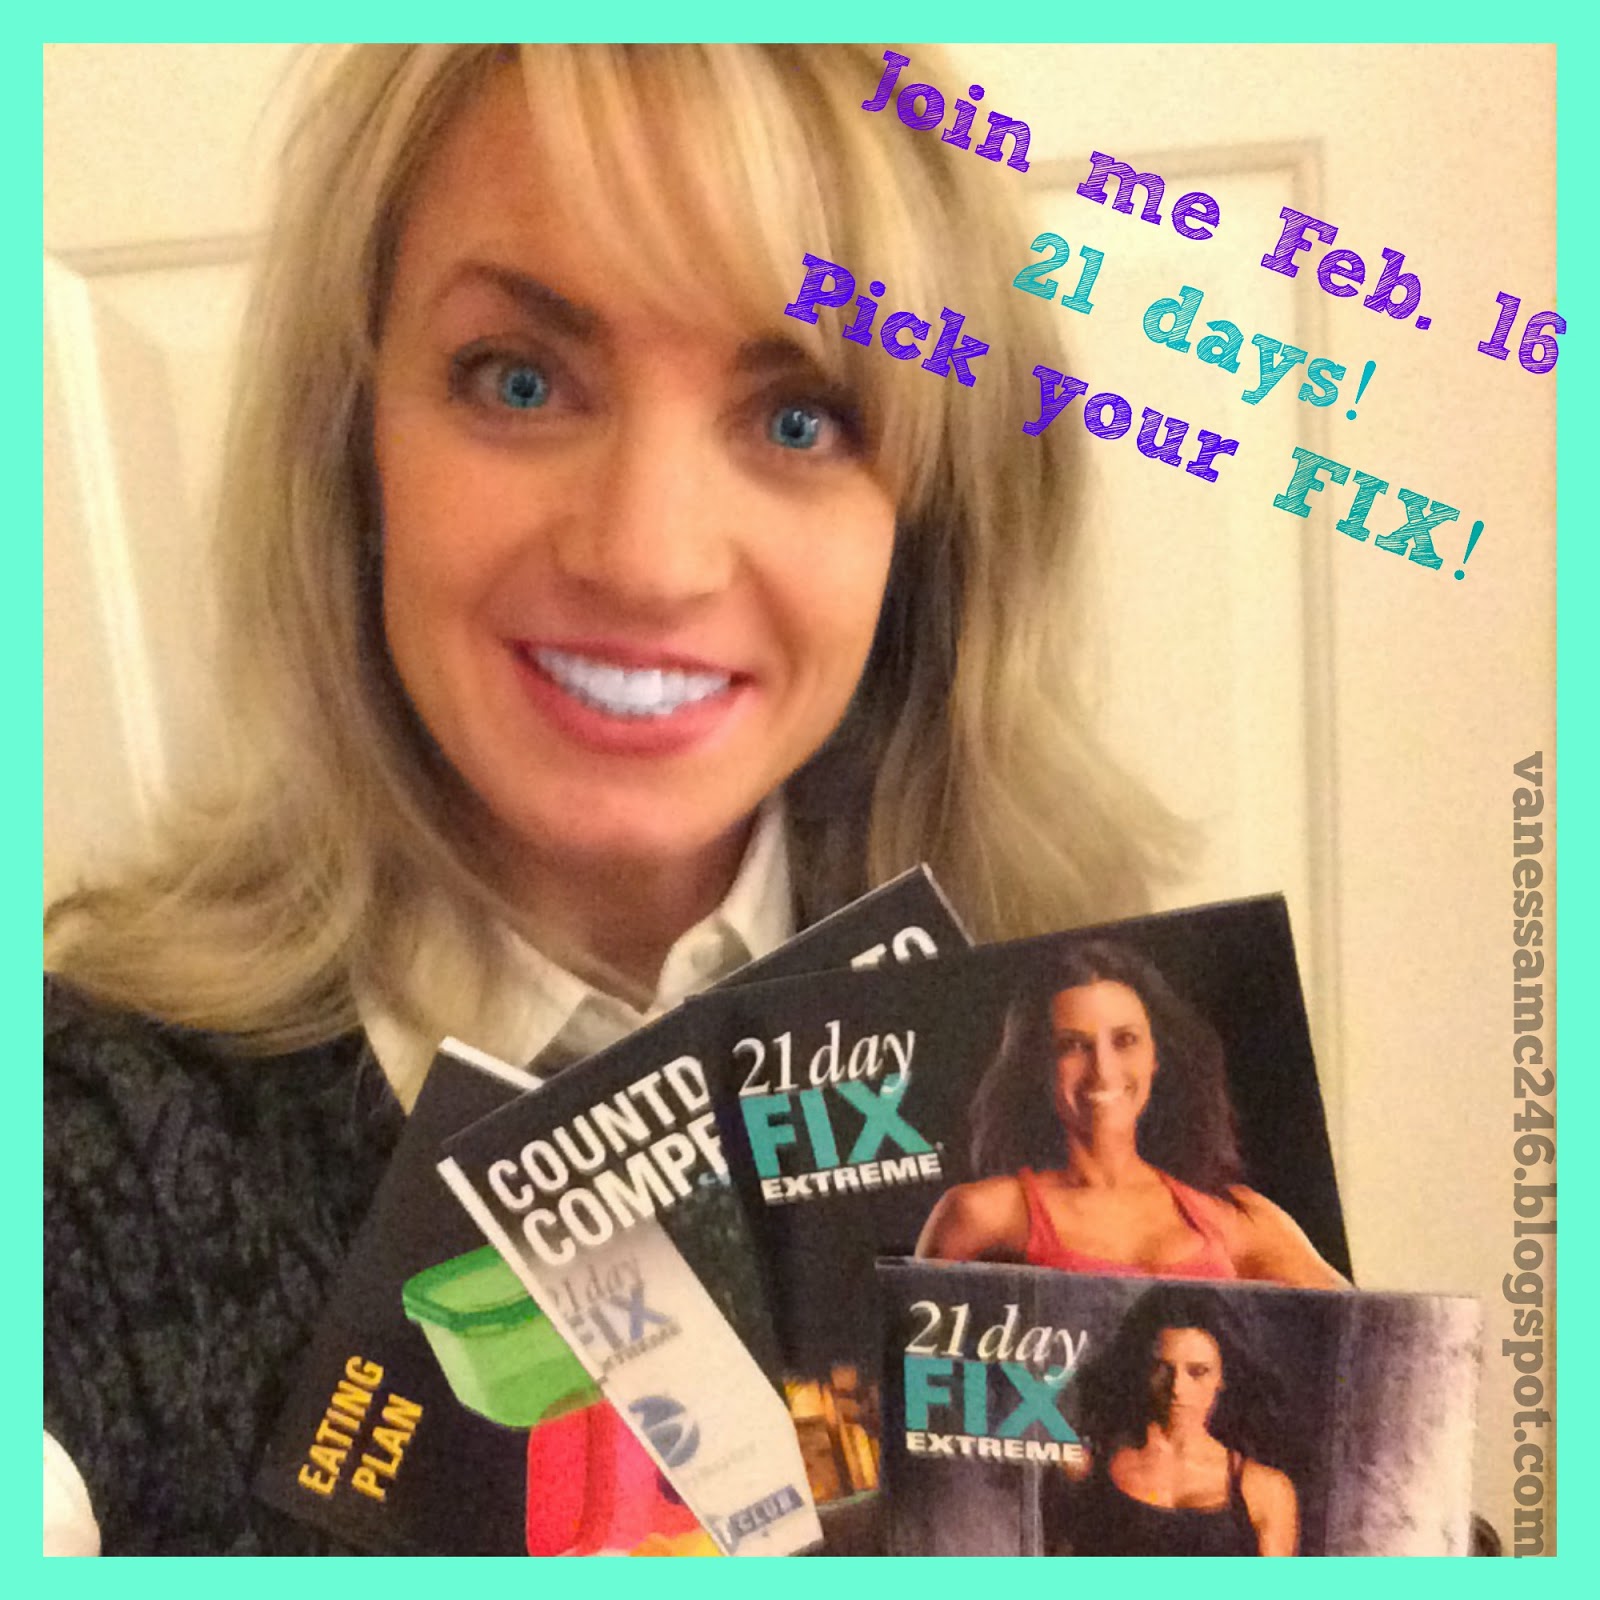 21 Day Fix Extreme, vanessamc246, The Butterfly Effect, Vanessa McLaughlin